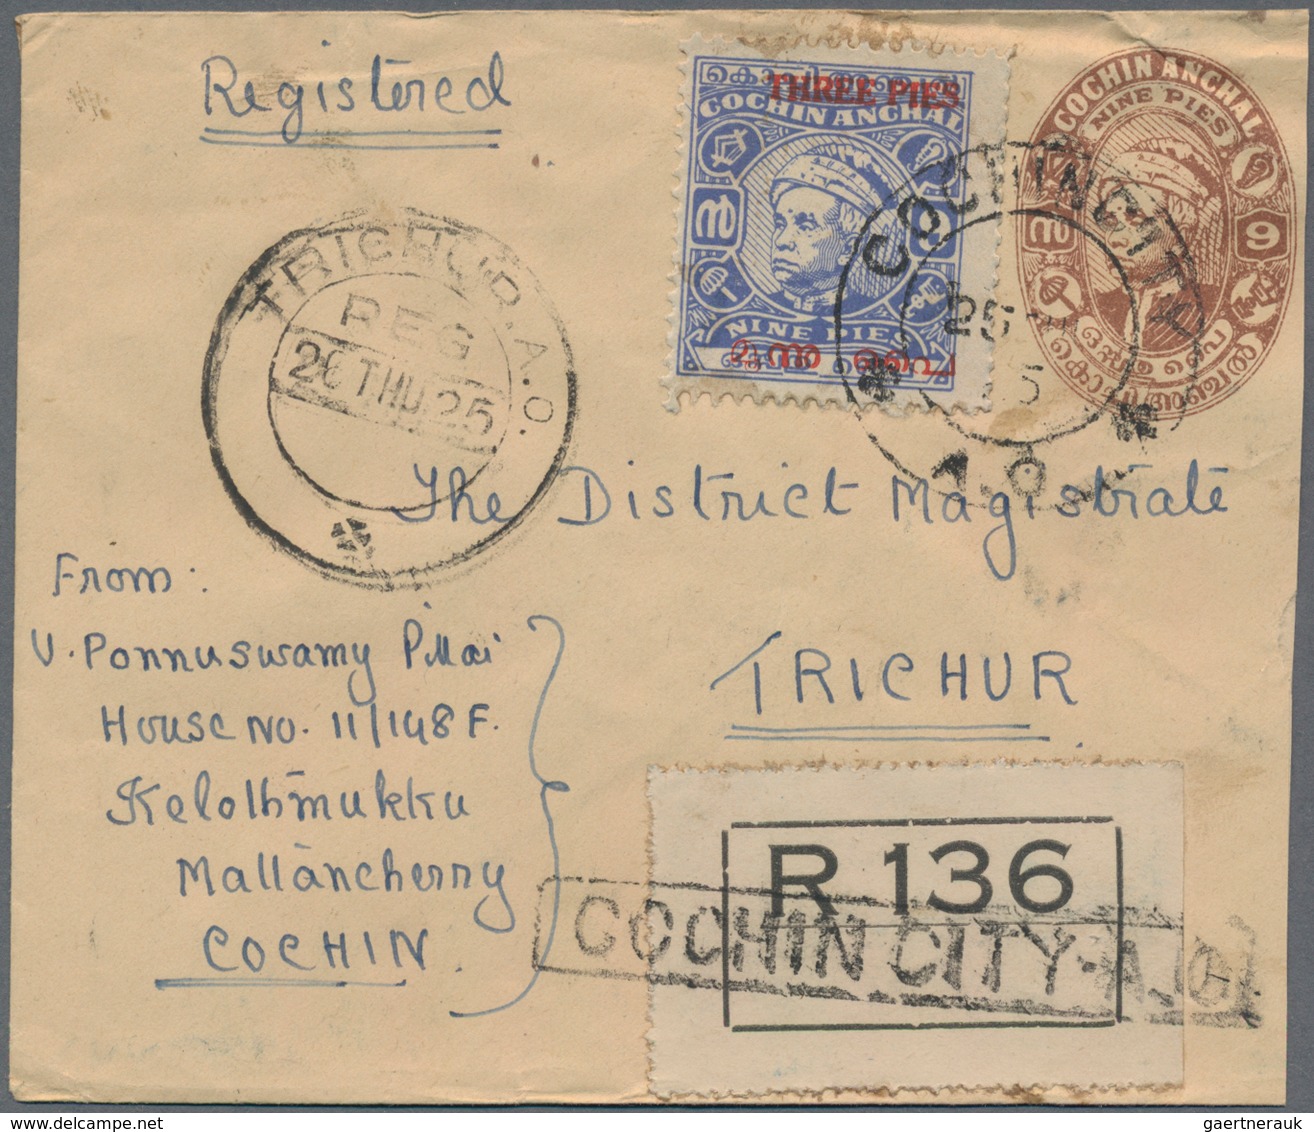 Indien - Feudalstaaten - Cochin: COCHIN 1892-1940's: Collection of 49 postal stationery cards (31) a